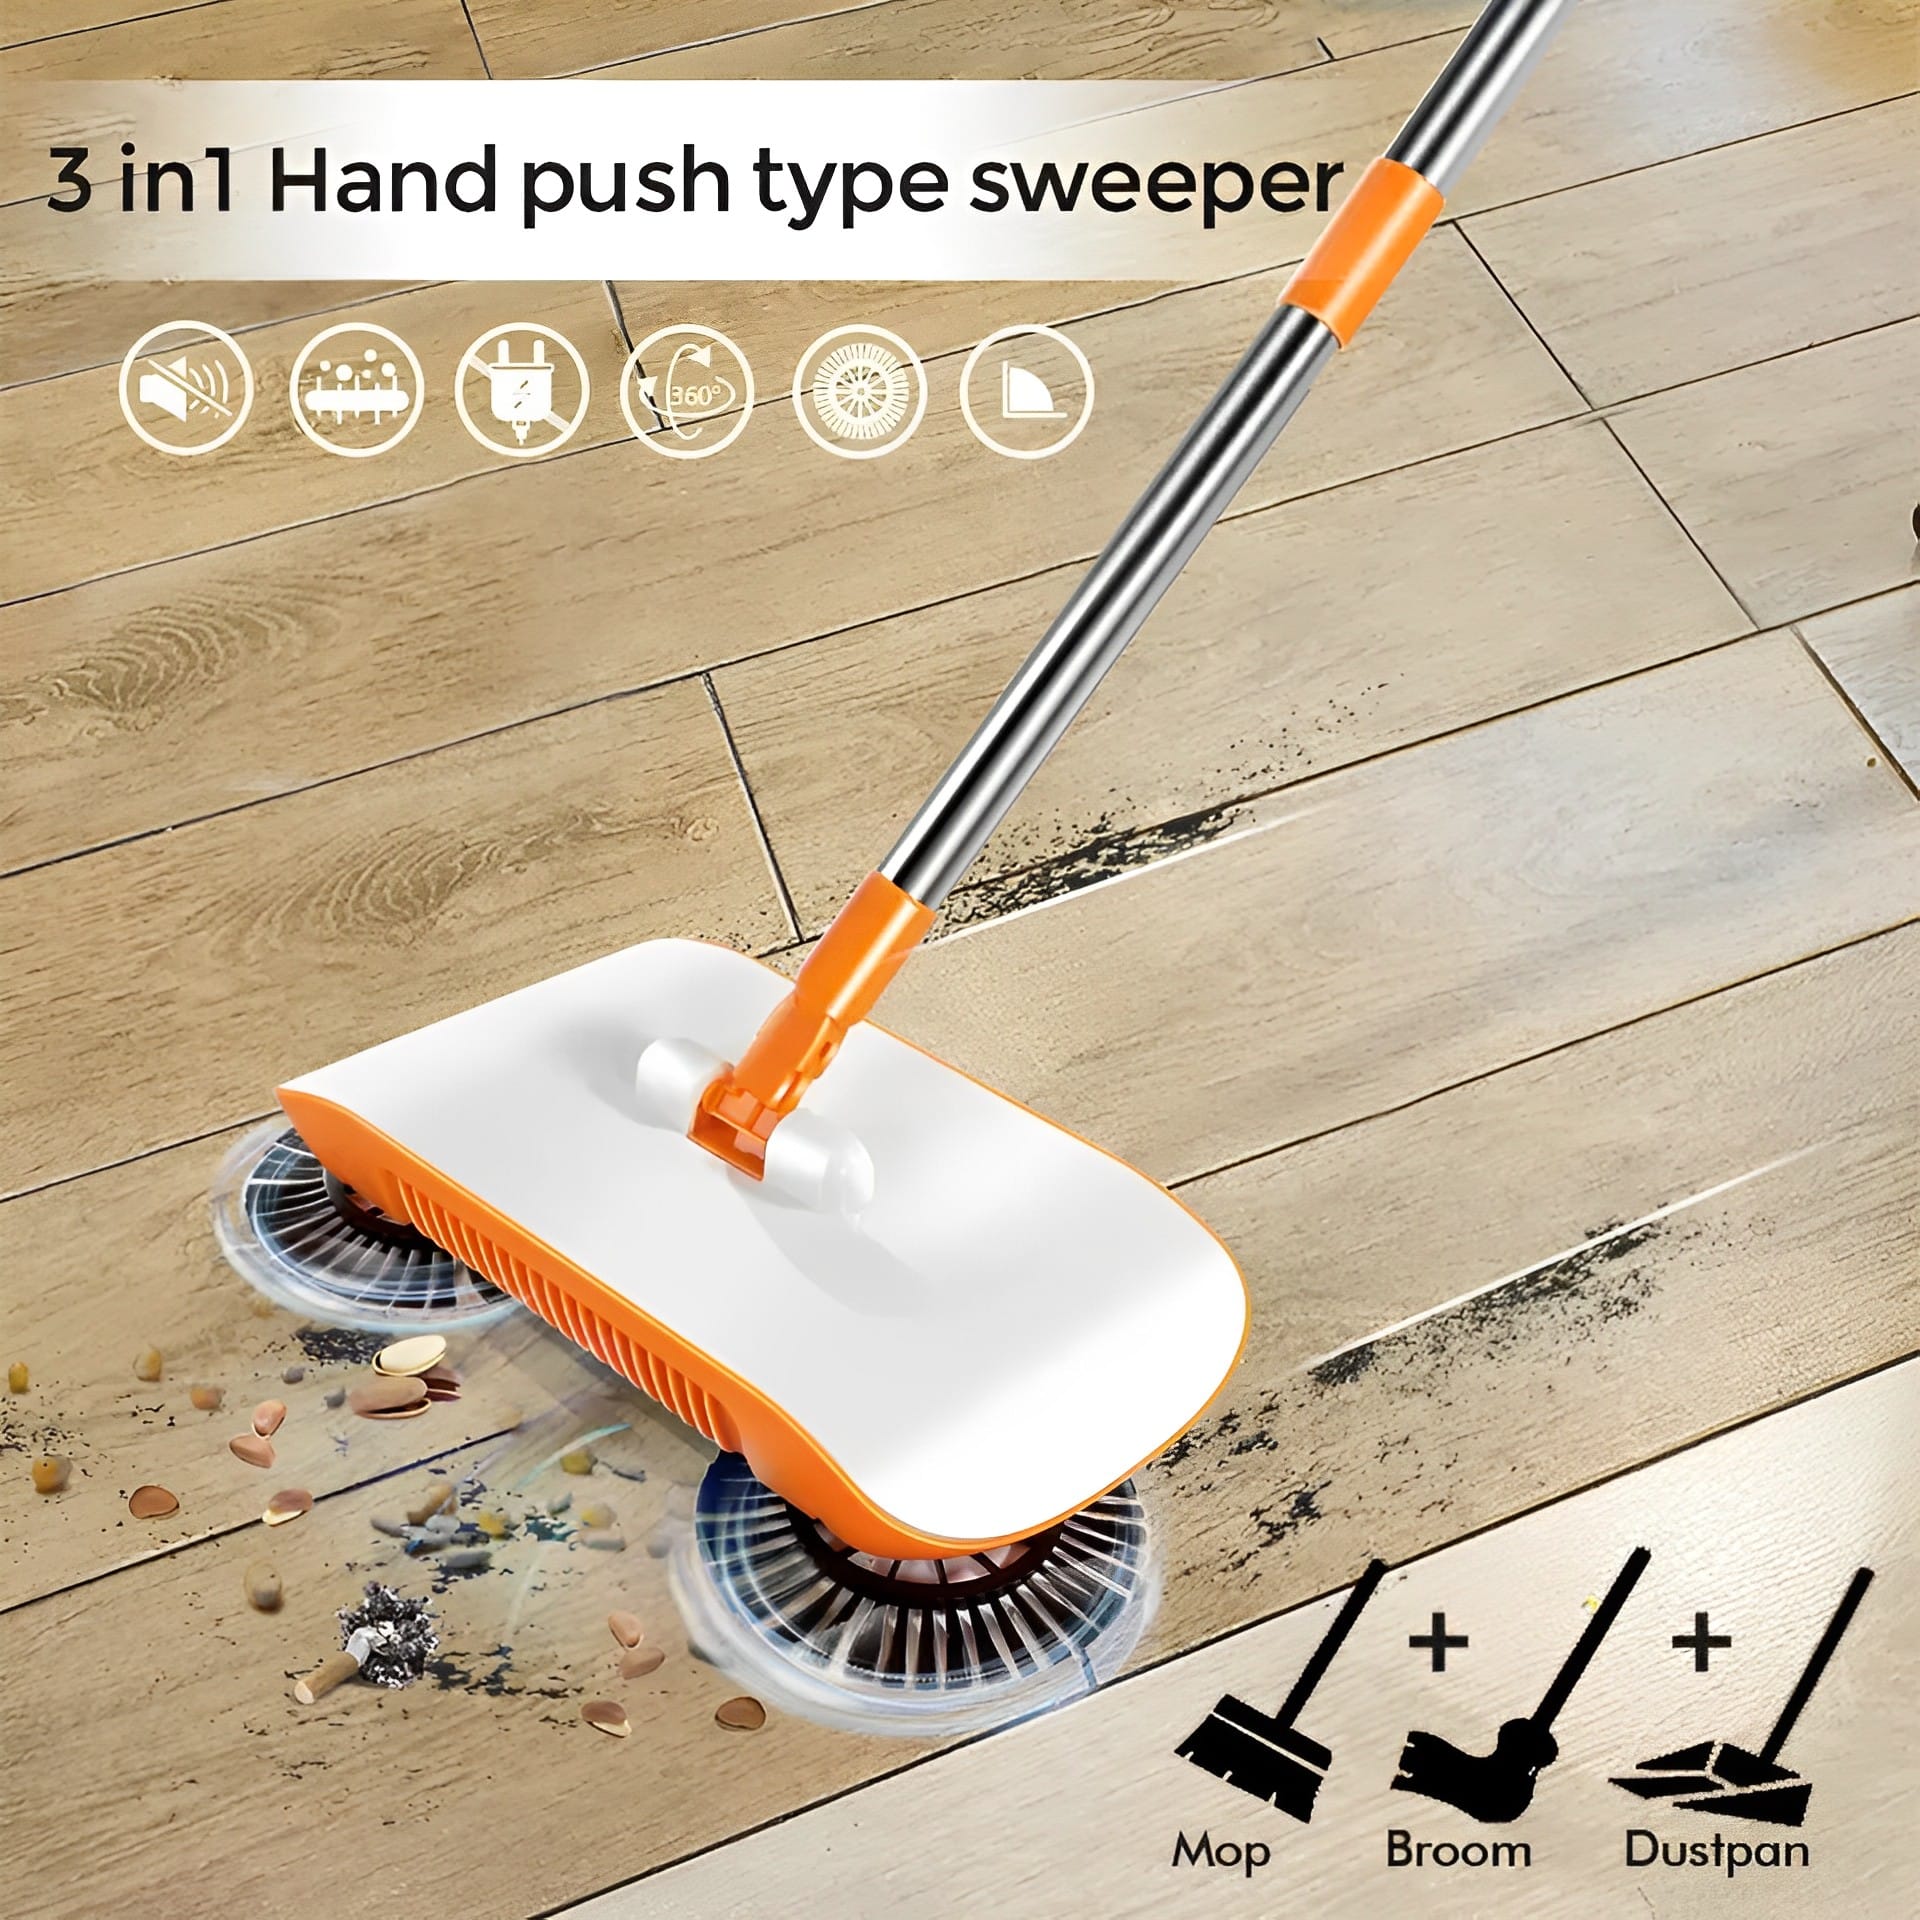 This Hand-Push Rotating Floor Sweeper is great at picking everything up and definitely easier than getting the vacuum cleaner out all the time.